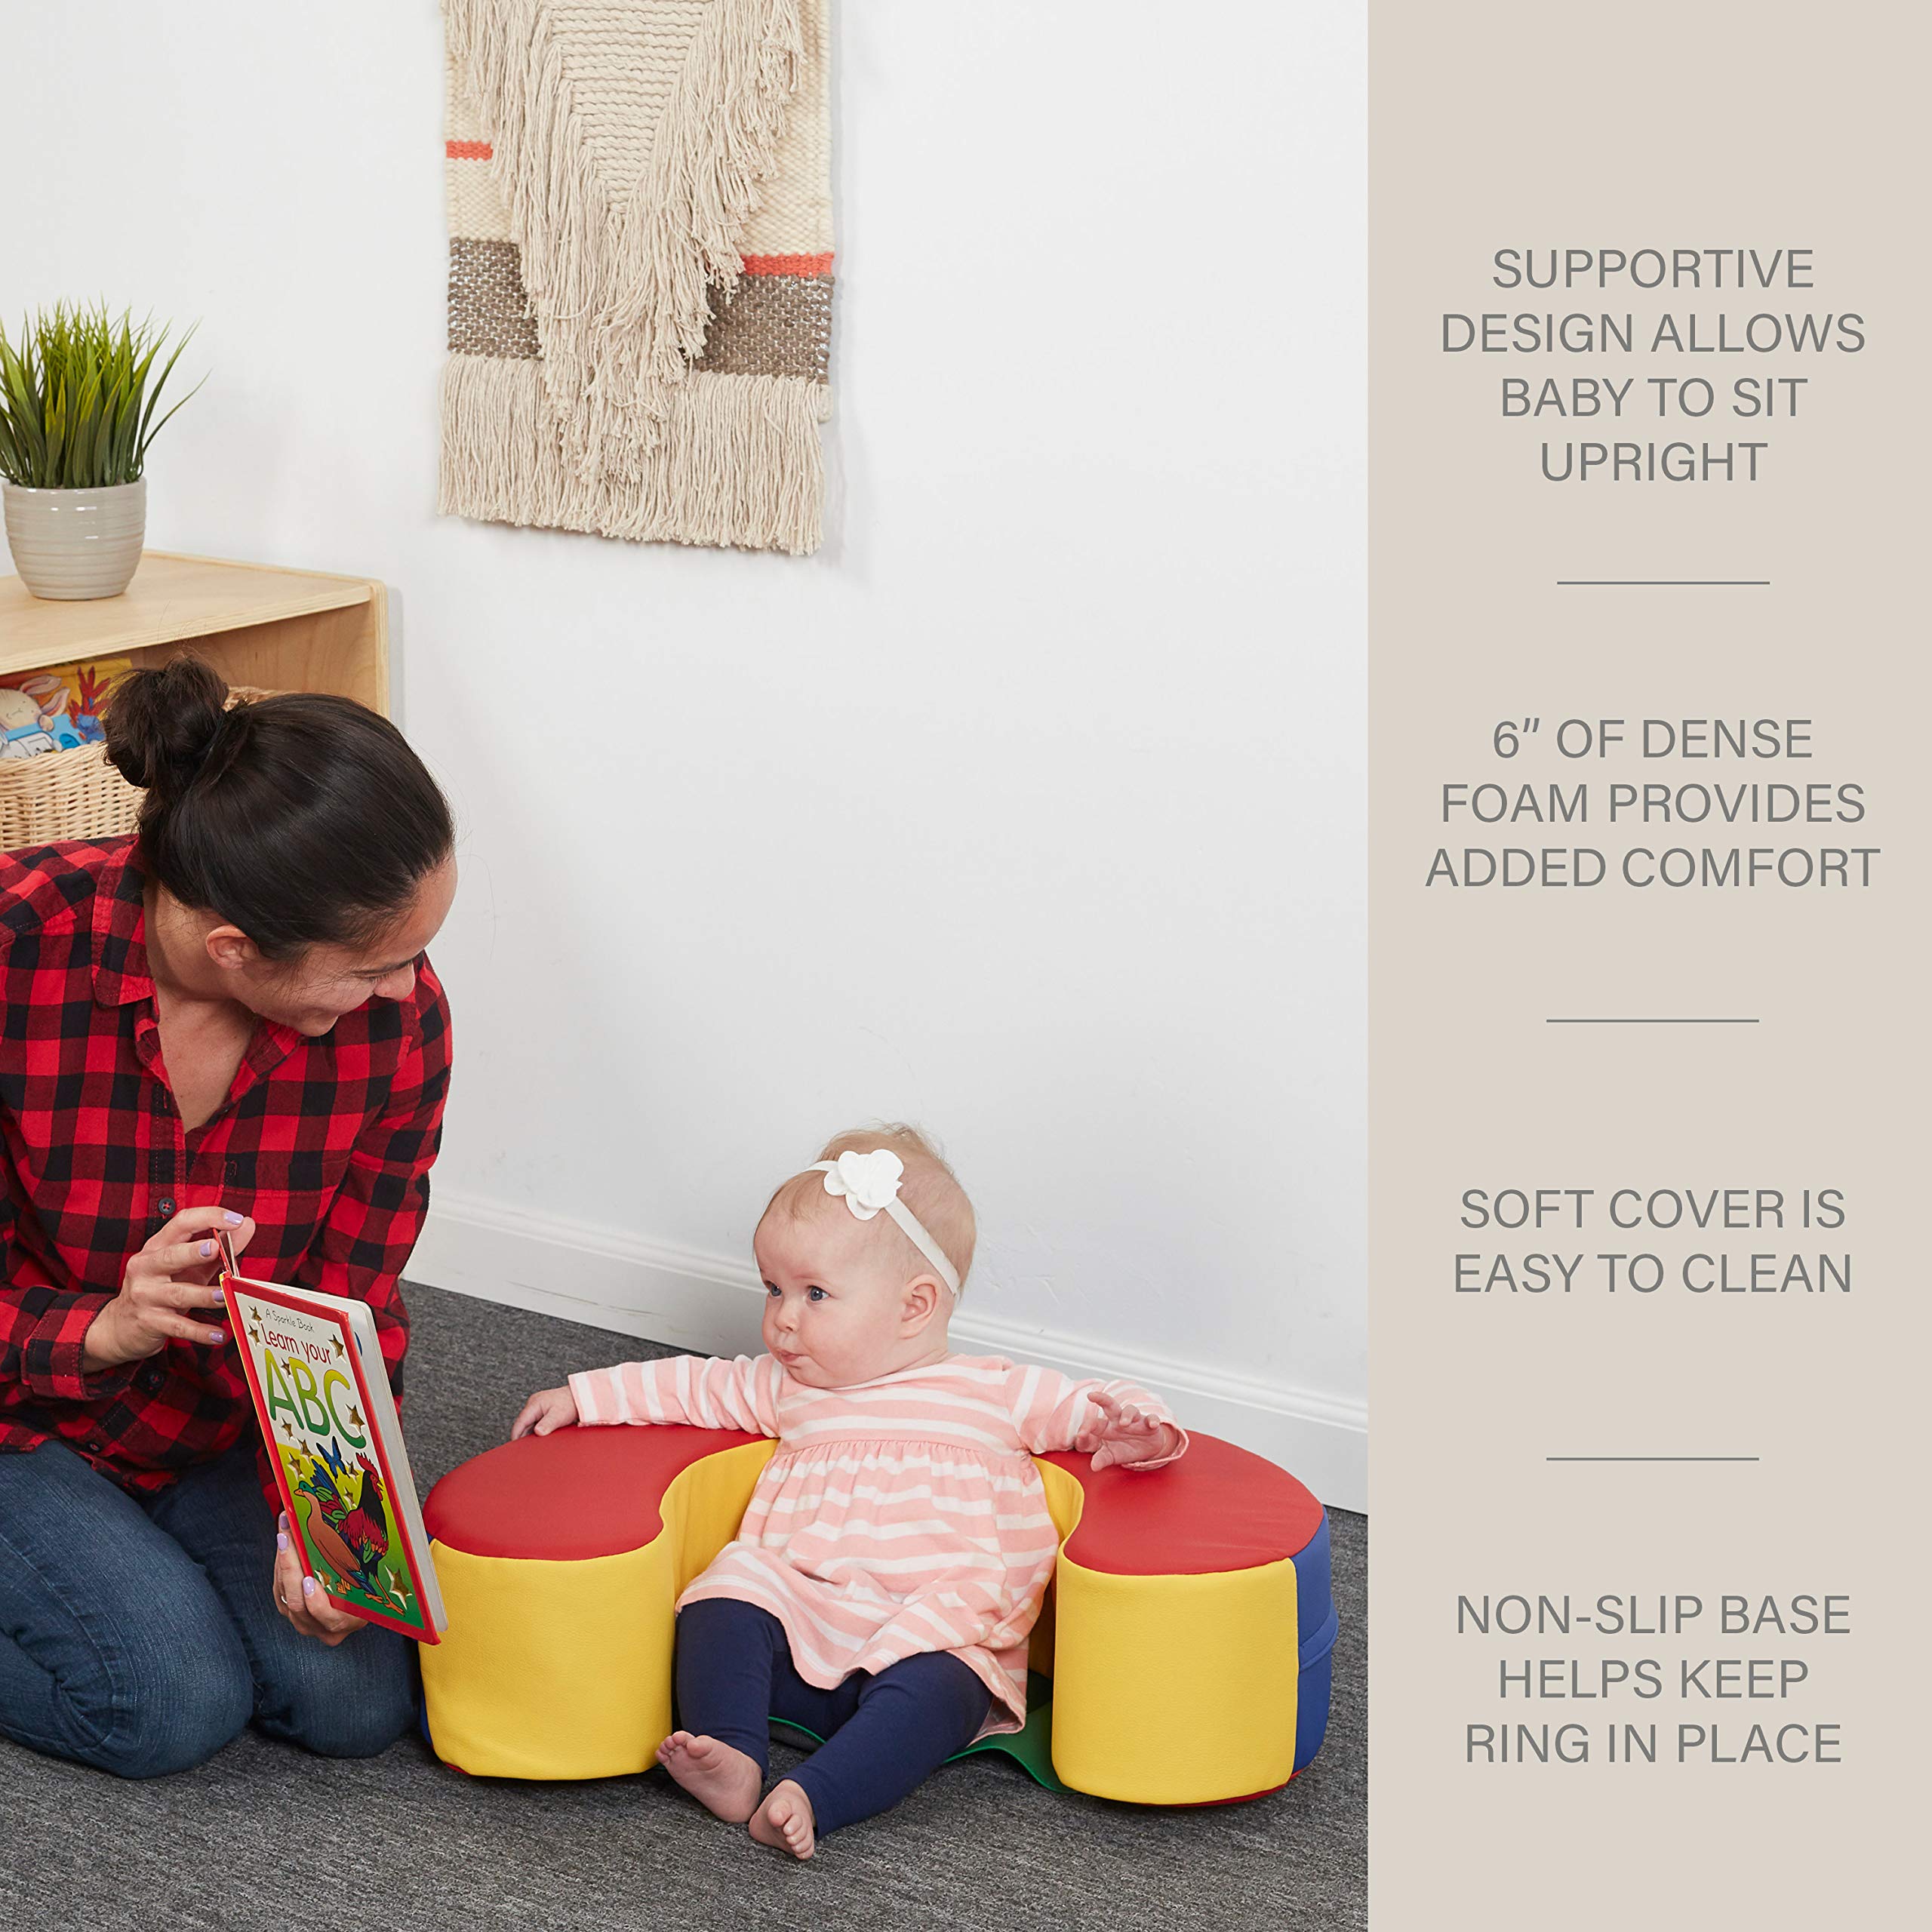 Factory Direct Partners 10423-AS SoftScape Sit and Support Ring for Babies and Infants, Soft Cushioned Foam Floor Seat with Non-Slip Bottom for Nursey, Playroom, Daycare - Assorted